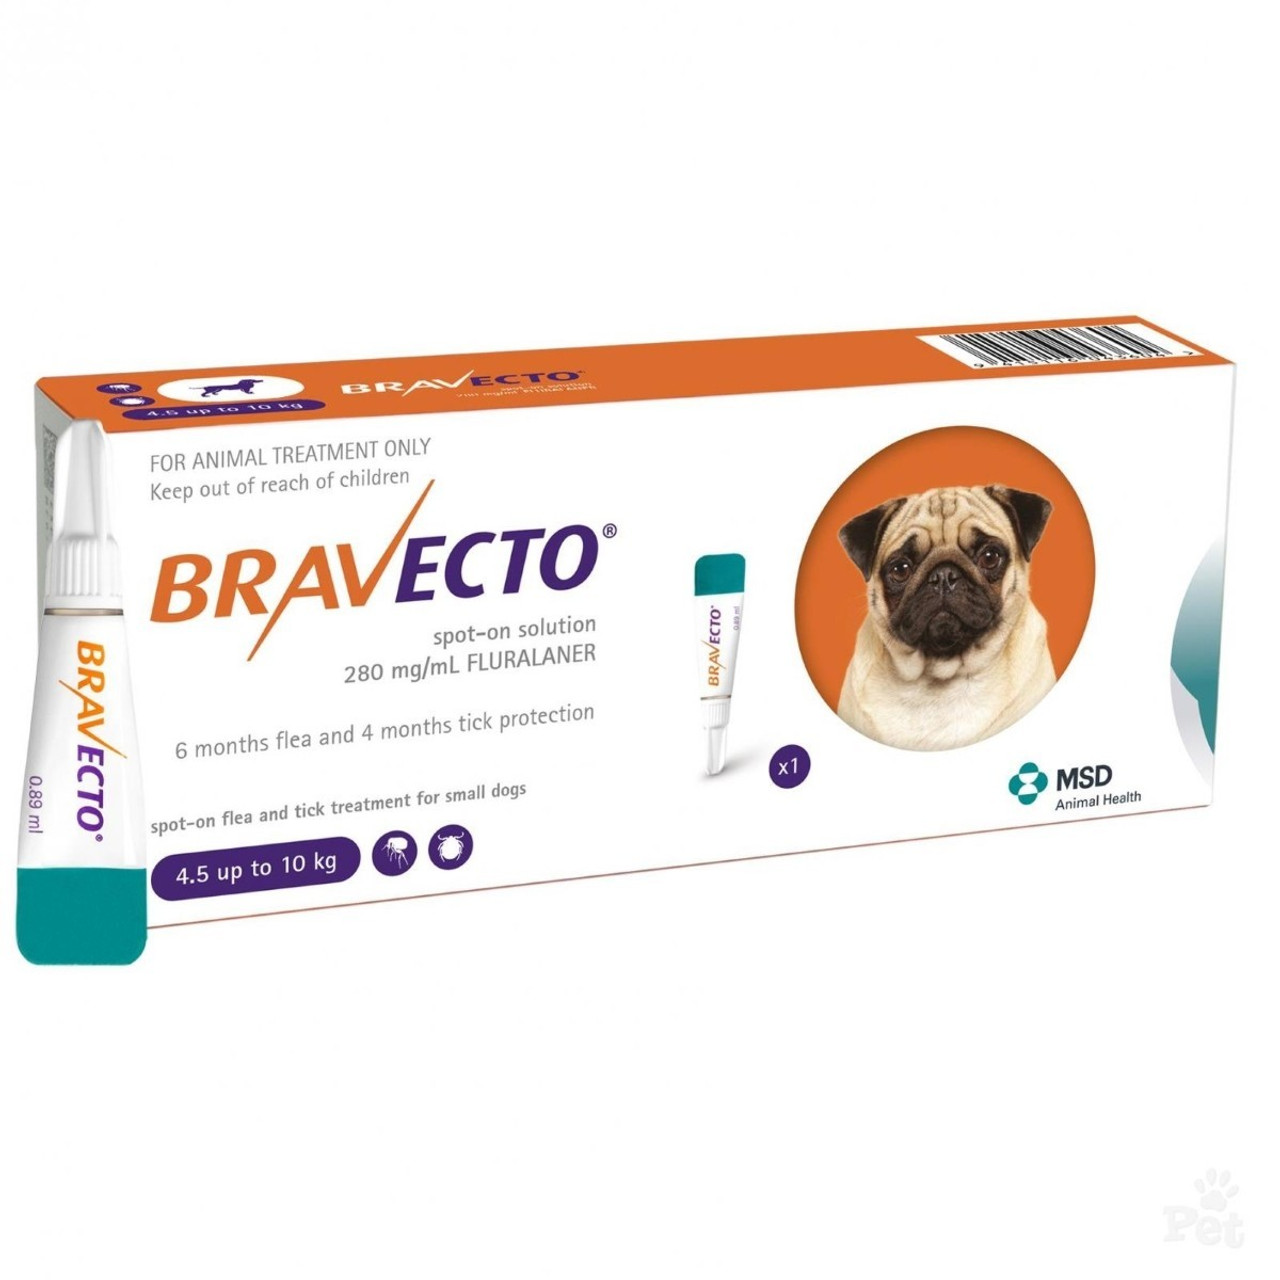 Bravecto Topical Solution for Dogs 9.9-22 lbs (4.5-10 kg) - Orange